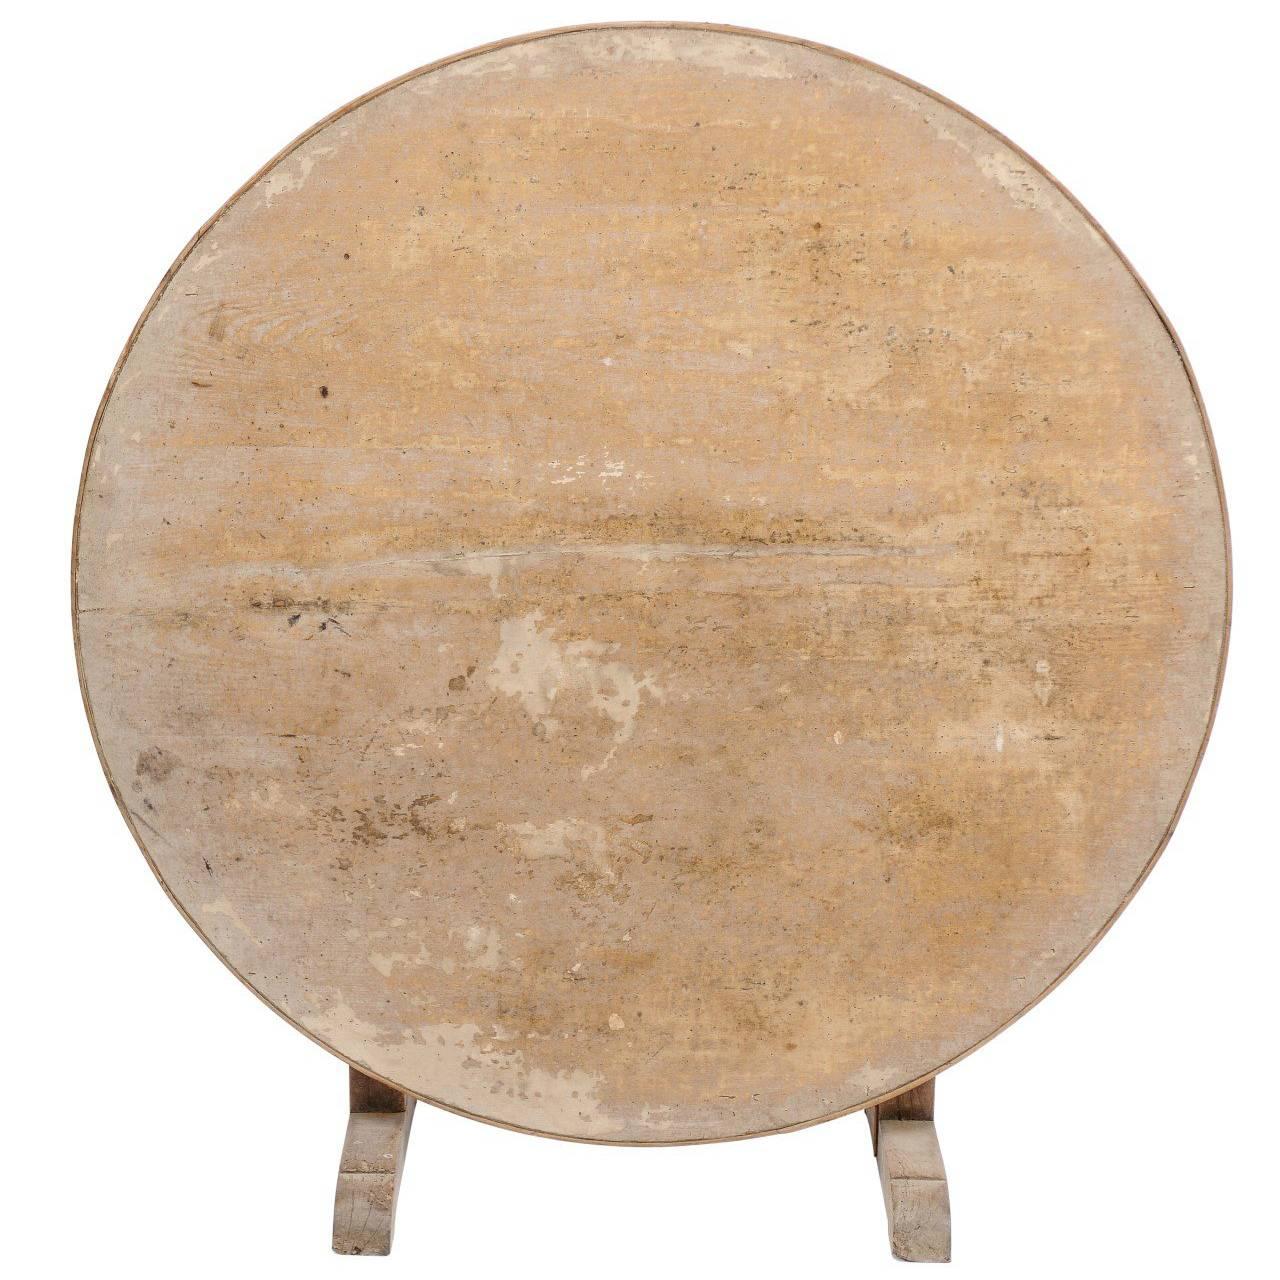 Southern French Round Wine Tasting Table with Tapestry Remnants, circa 1920